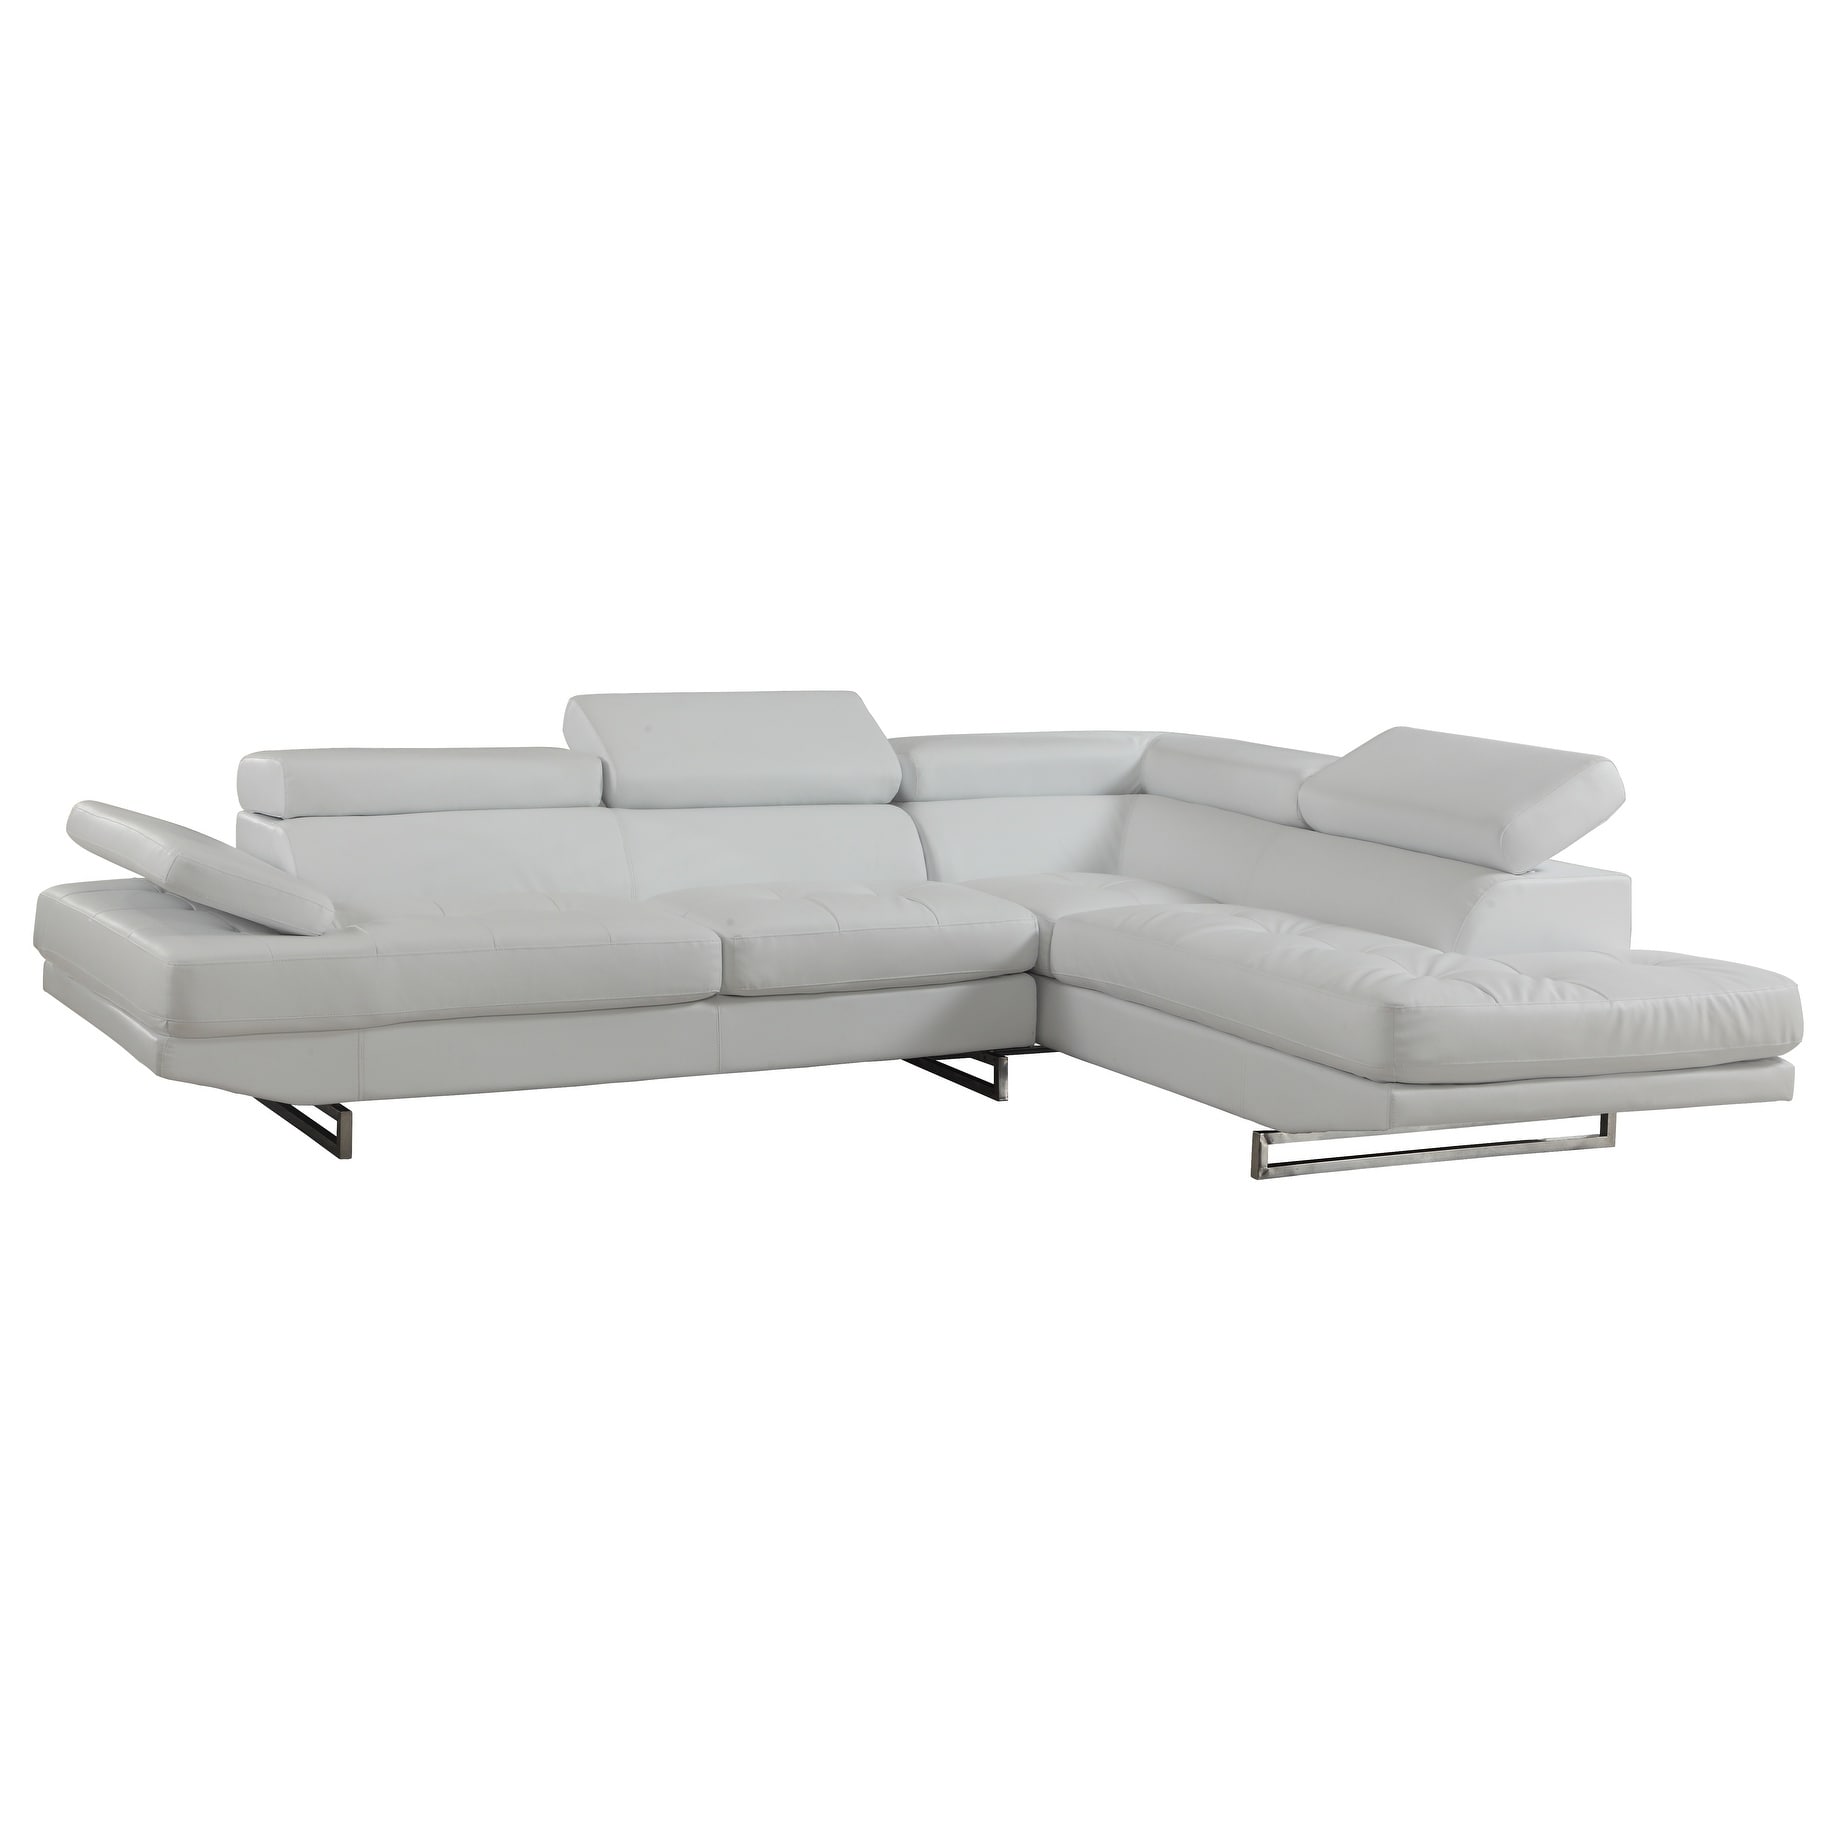 124" X 94" X 36" White Sectional LAF